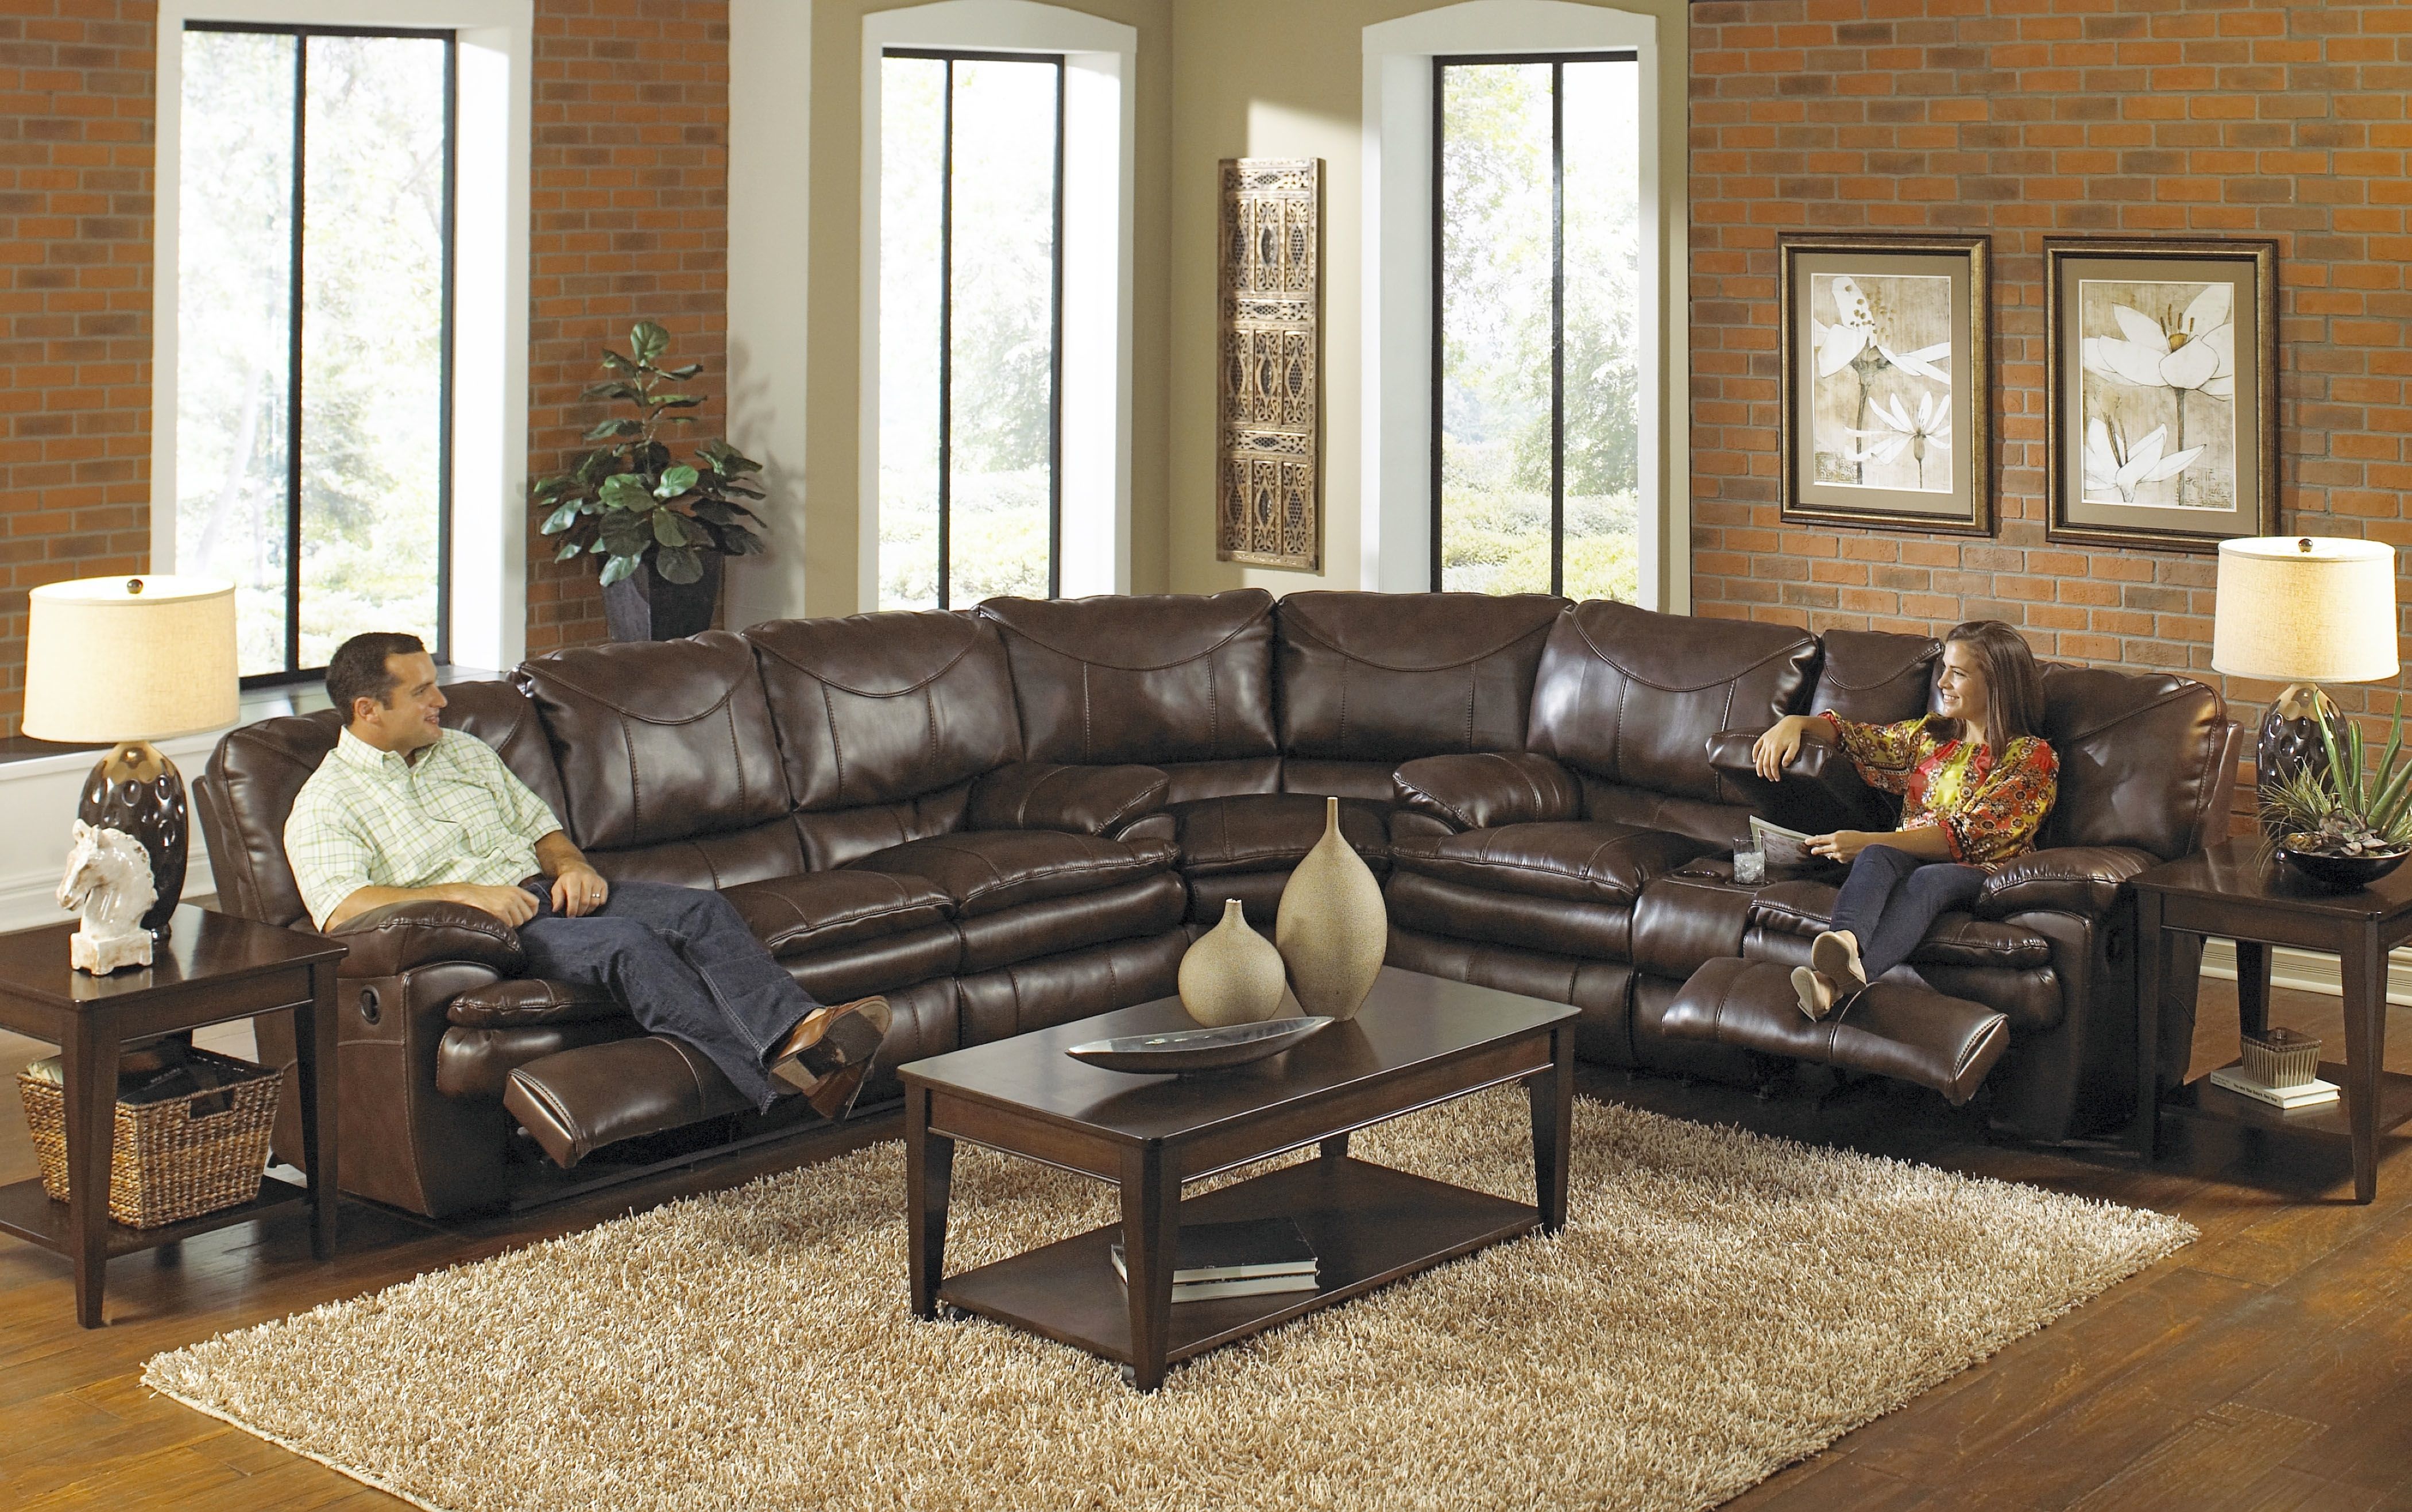 Epic High Quality Sectional Sofa 21 With Additional Modern Sofa With Regard To High Quality Sectional Sofas (Photo 6 of 10)